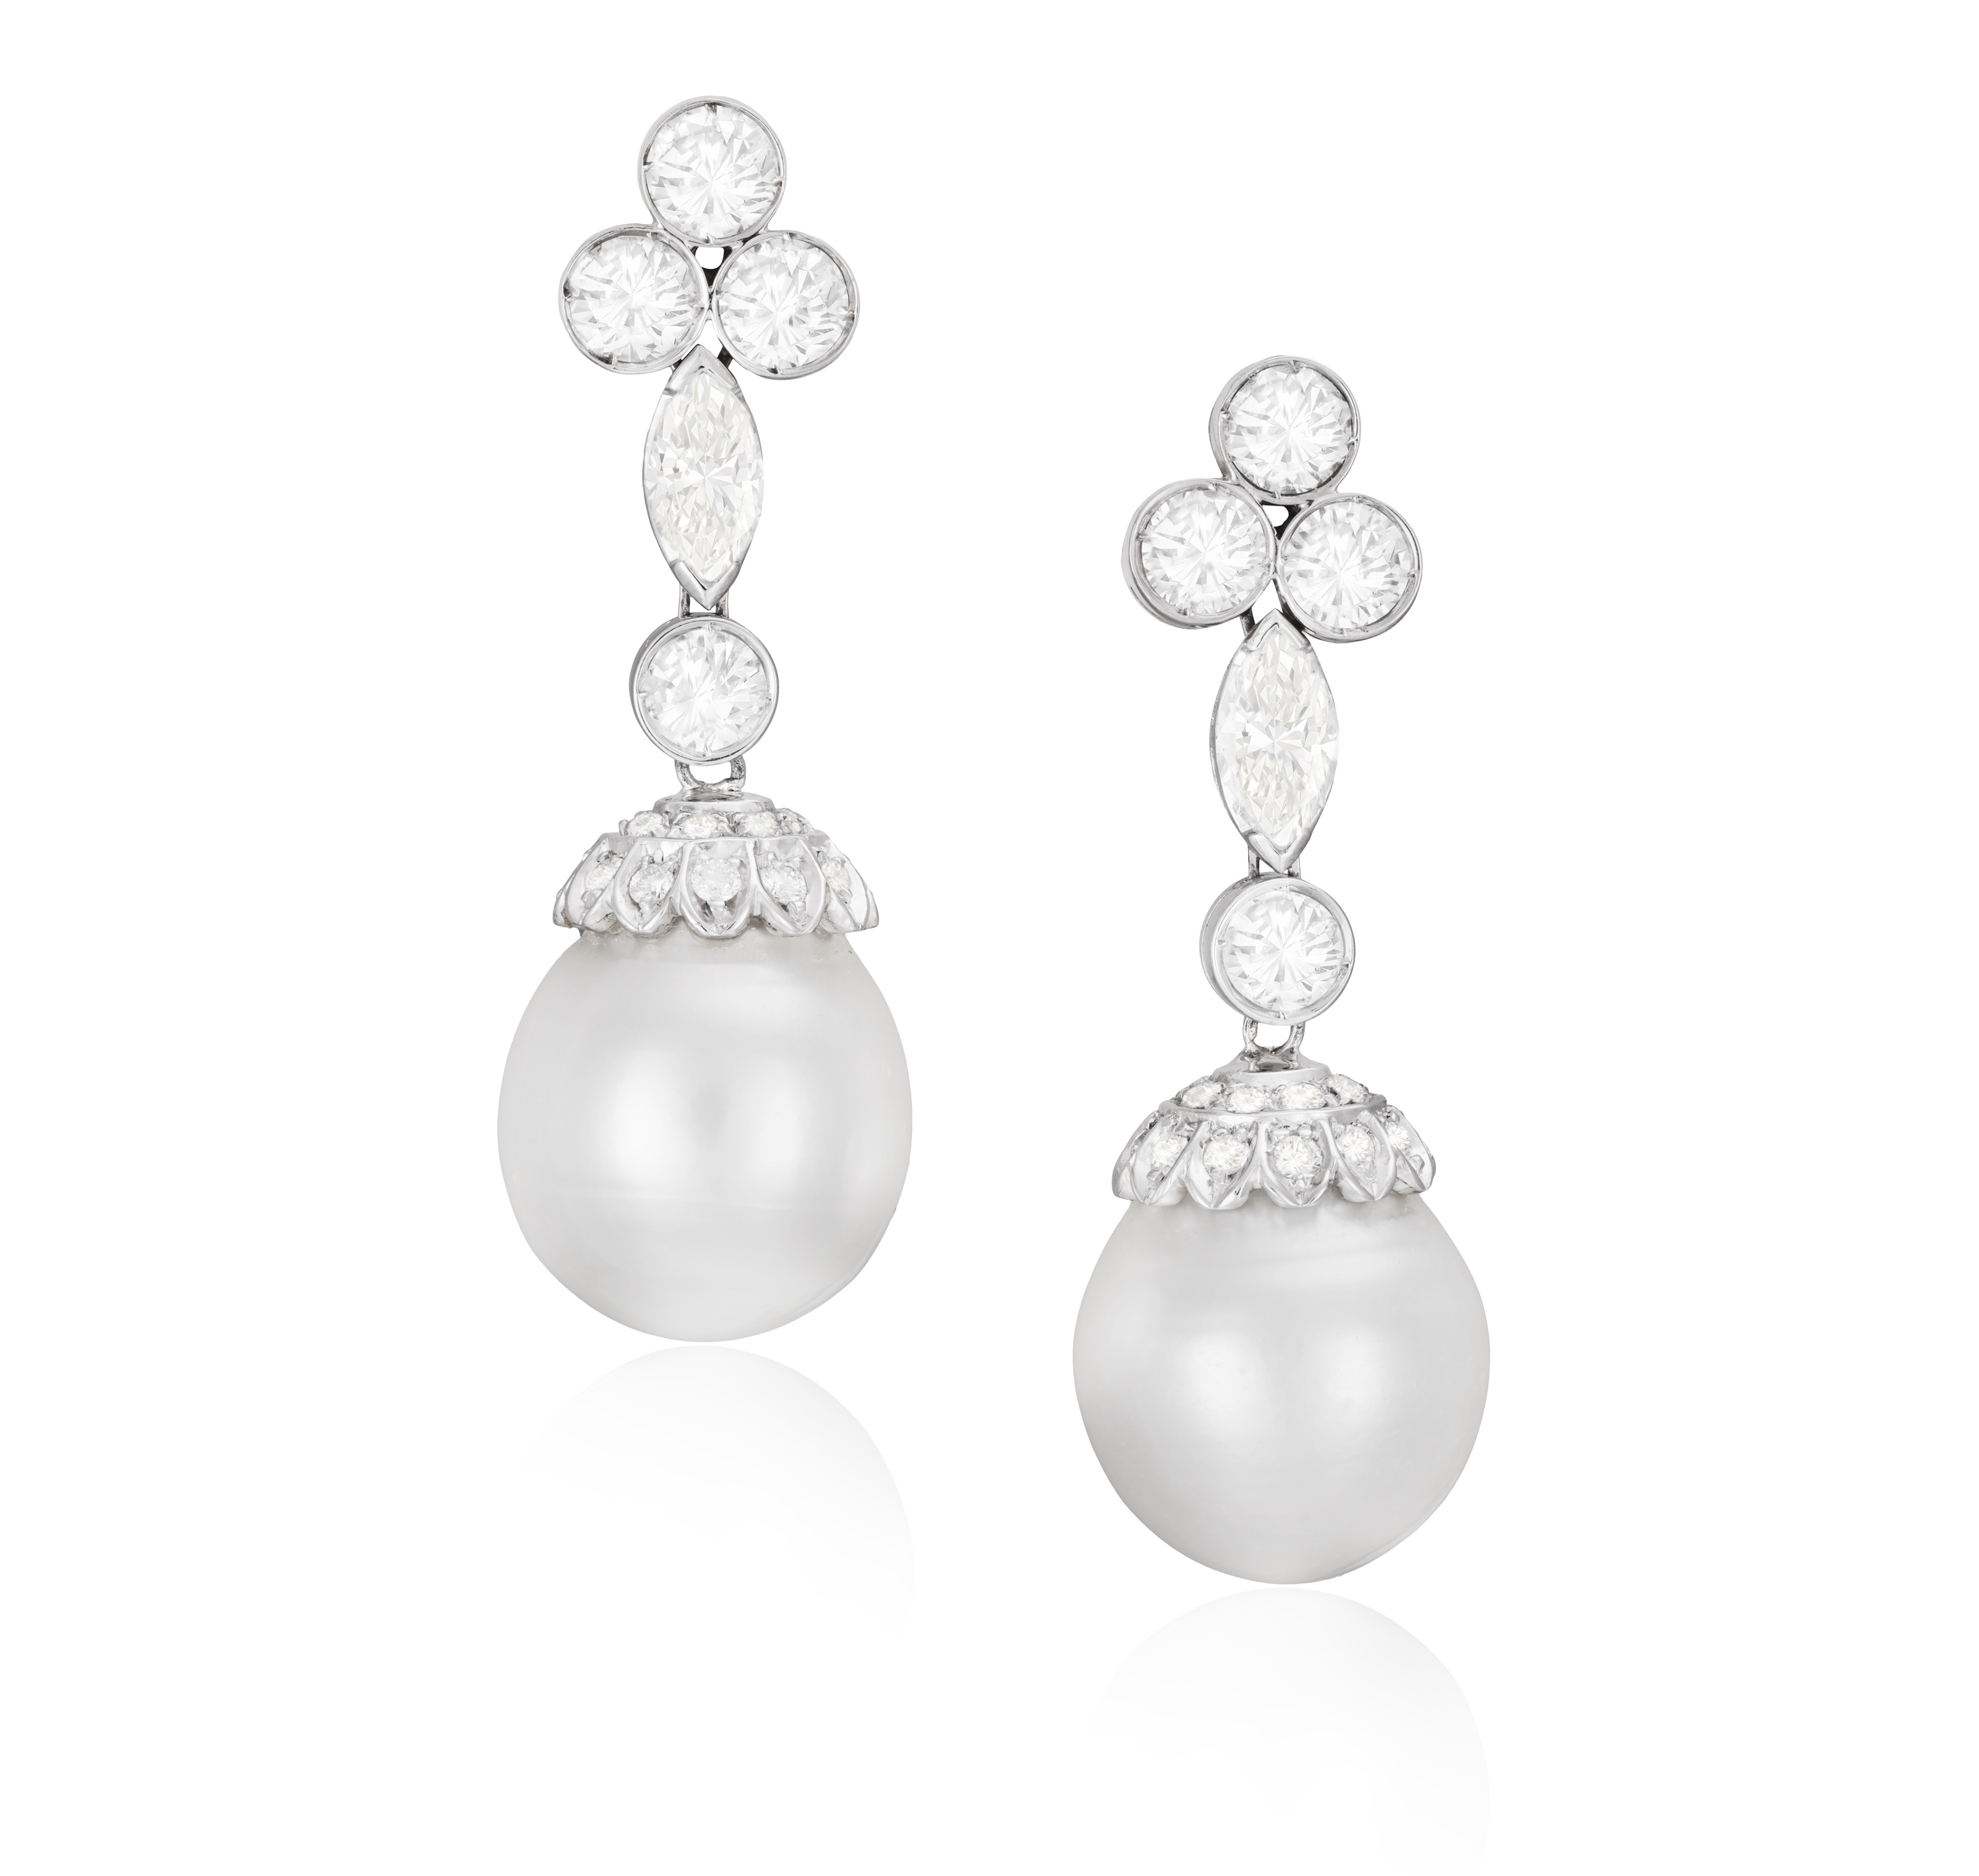 A PAIR OF CULTURED PEARL AND DIAMOND PENDENT EARRINGS Each cultured pearl of white tint measuring